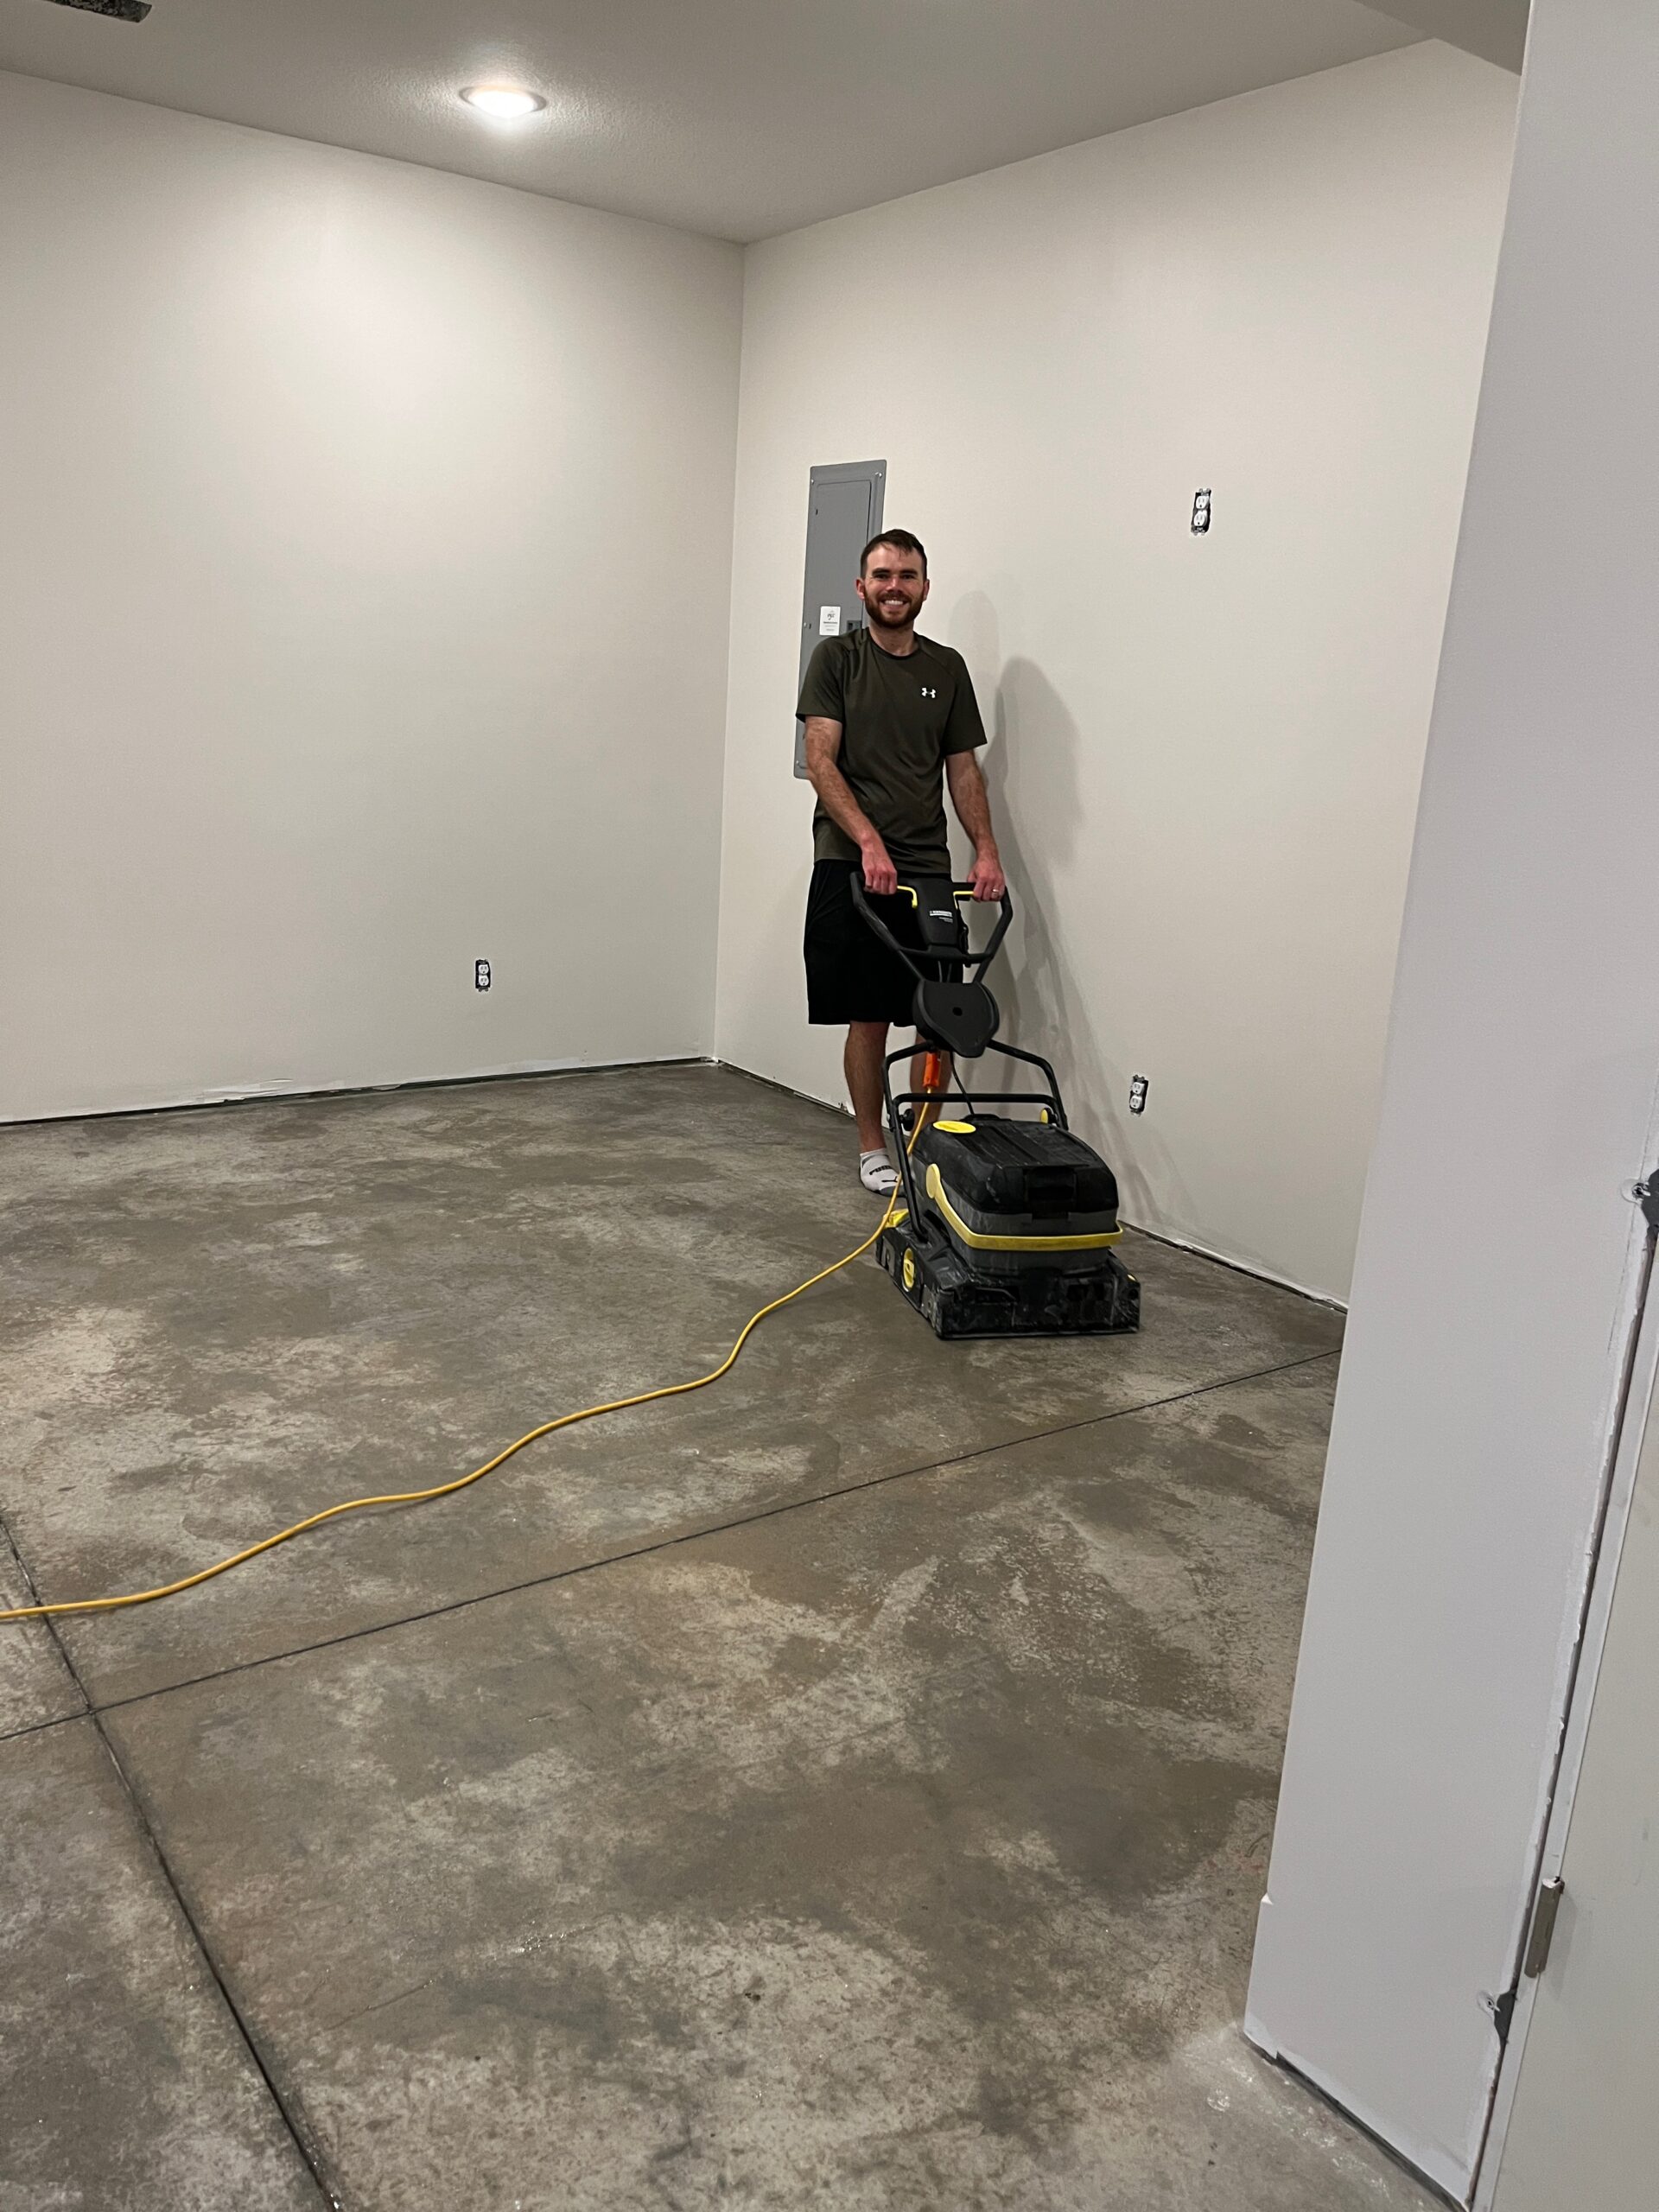 Customer mechanically scrubbing the concrete floor for thorough cleaning